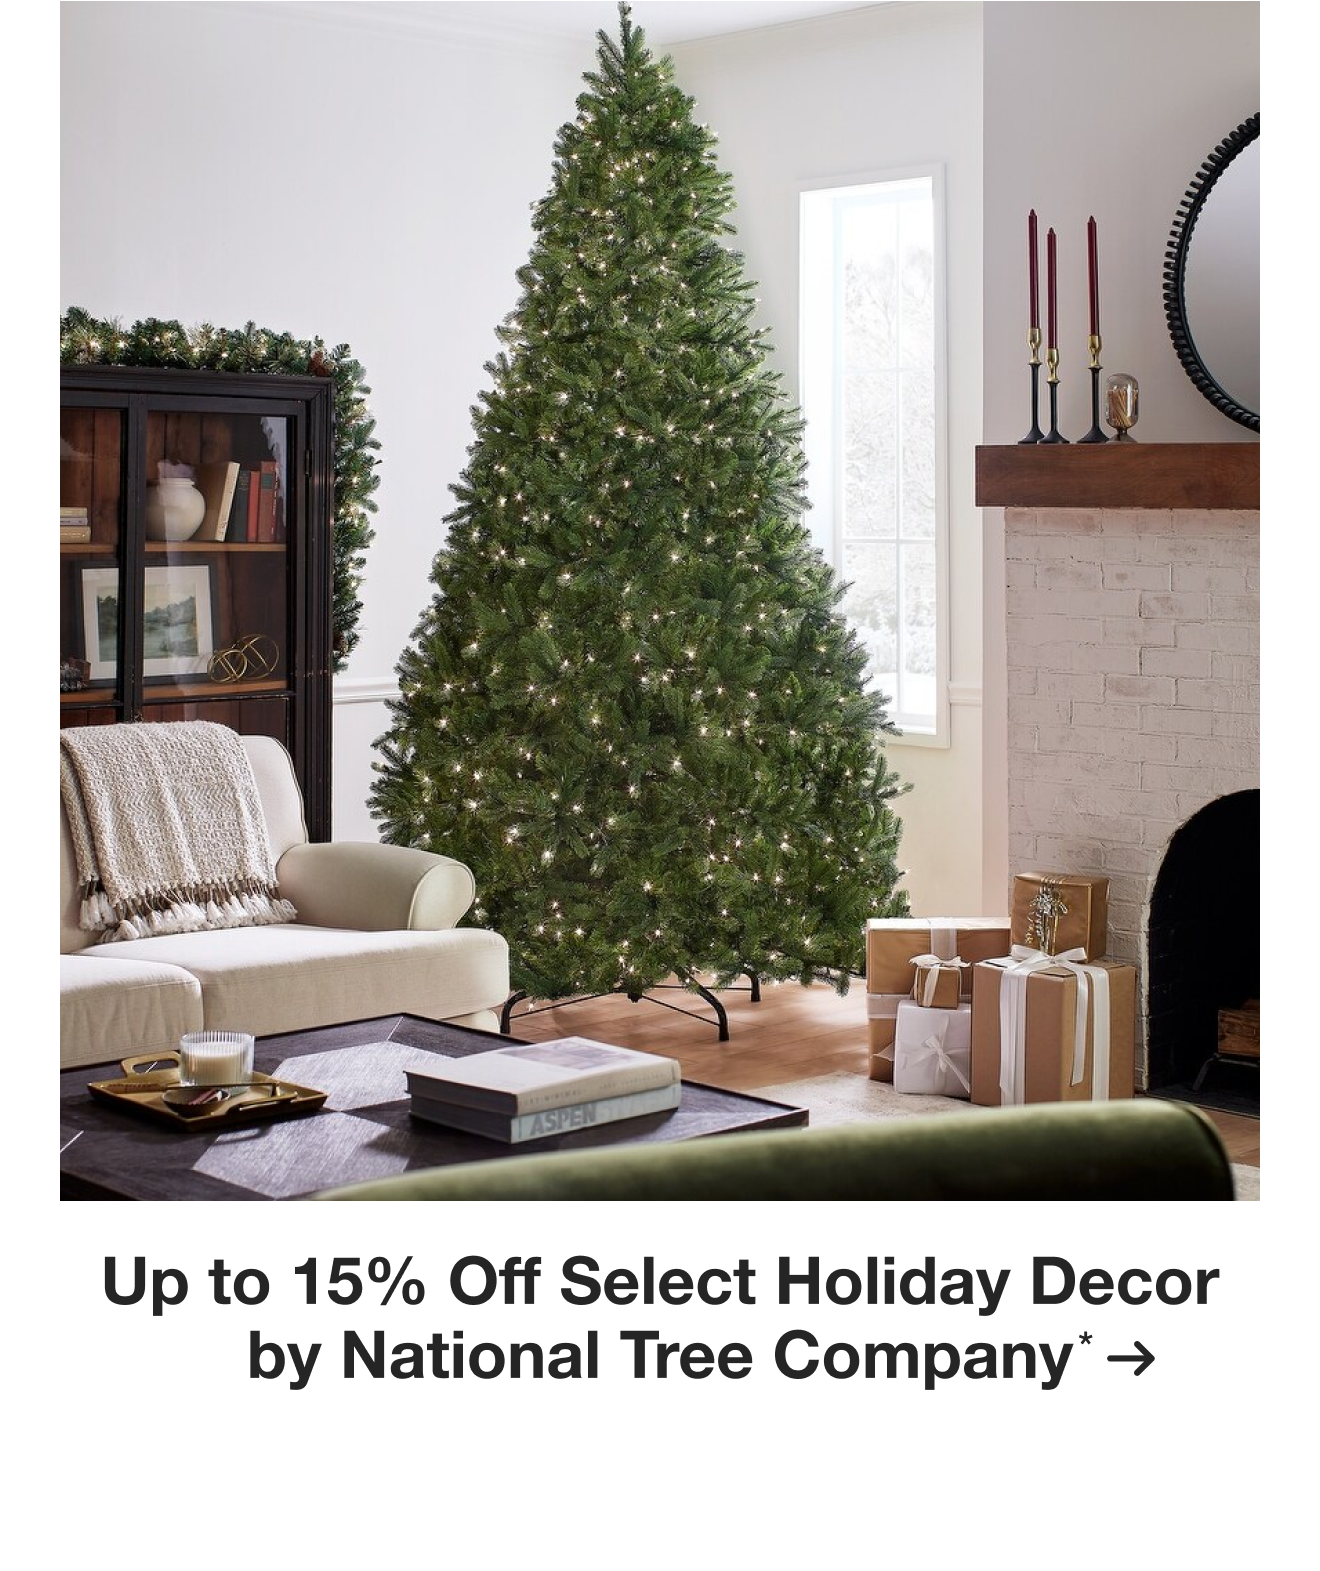 Up to 15% Off Select Home Decor by National Tree*